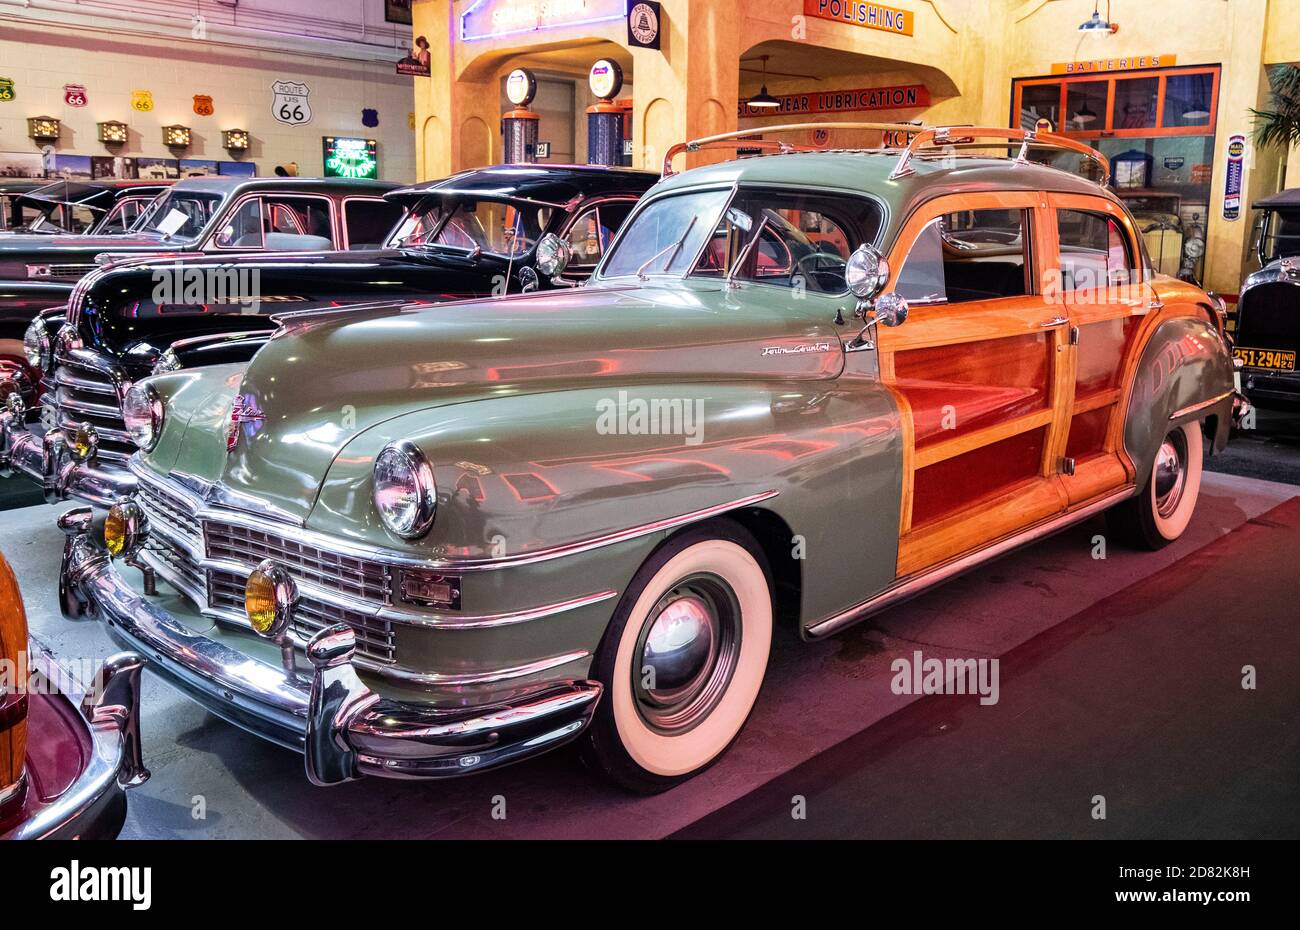 Chicago, USA. 25th Oct, 2020. A 1947 Chrysler Town and Country Convertible is seen at Klairmont Kollections in Chicago, Illinois, the United States, on Oct. 25, 2020. Klairmont Kollections is a private car collection museum with an assemblage of over 300 vehicles. Credit: Joel Lerner/Xinhua/Alamy Live News Stock Photo